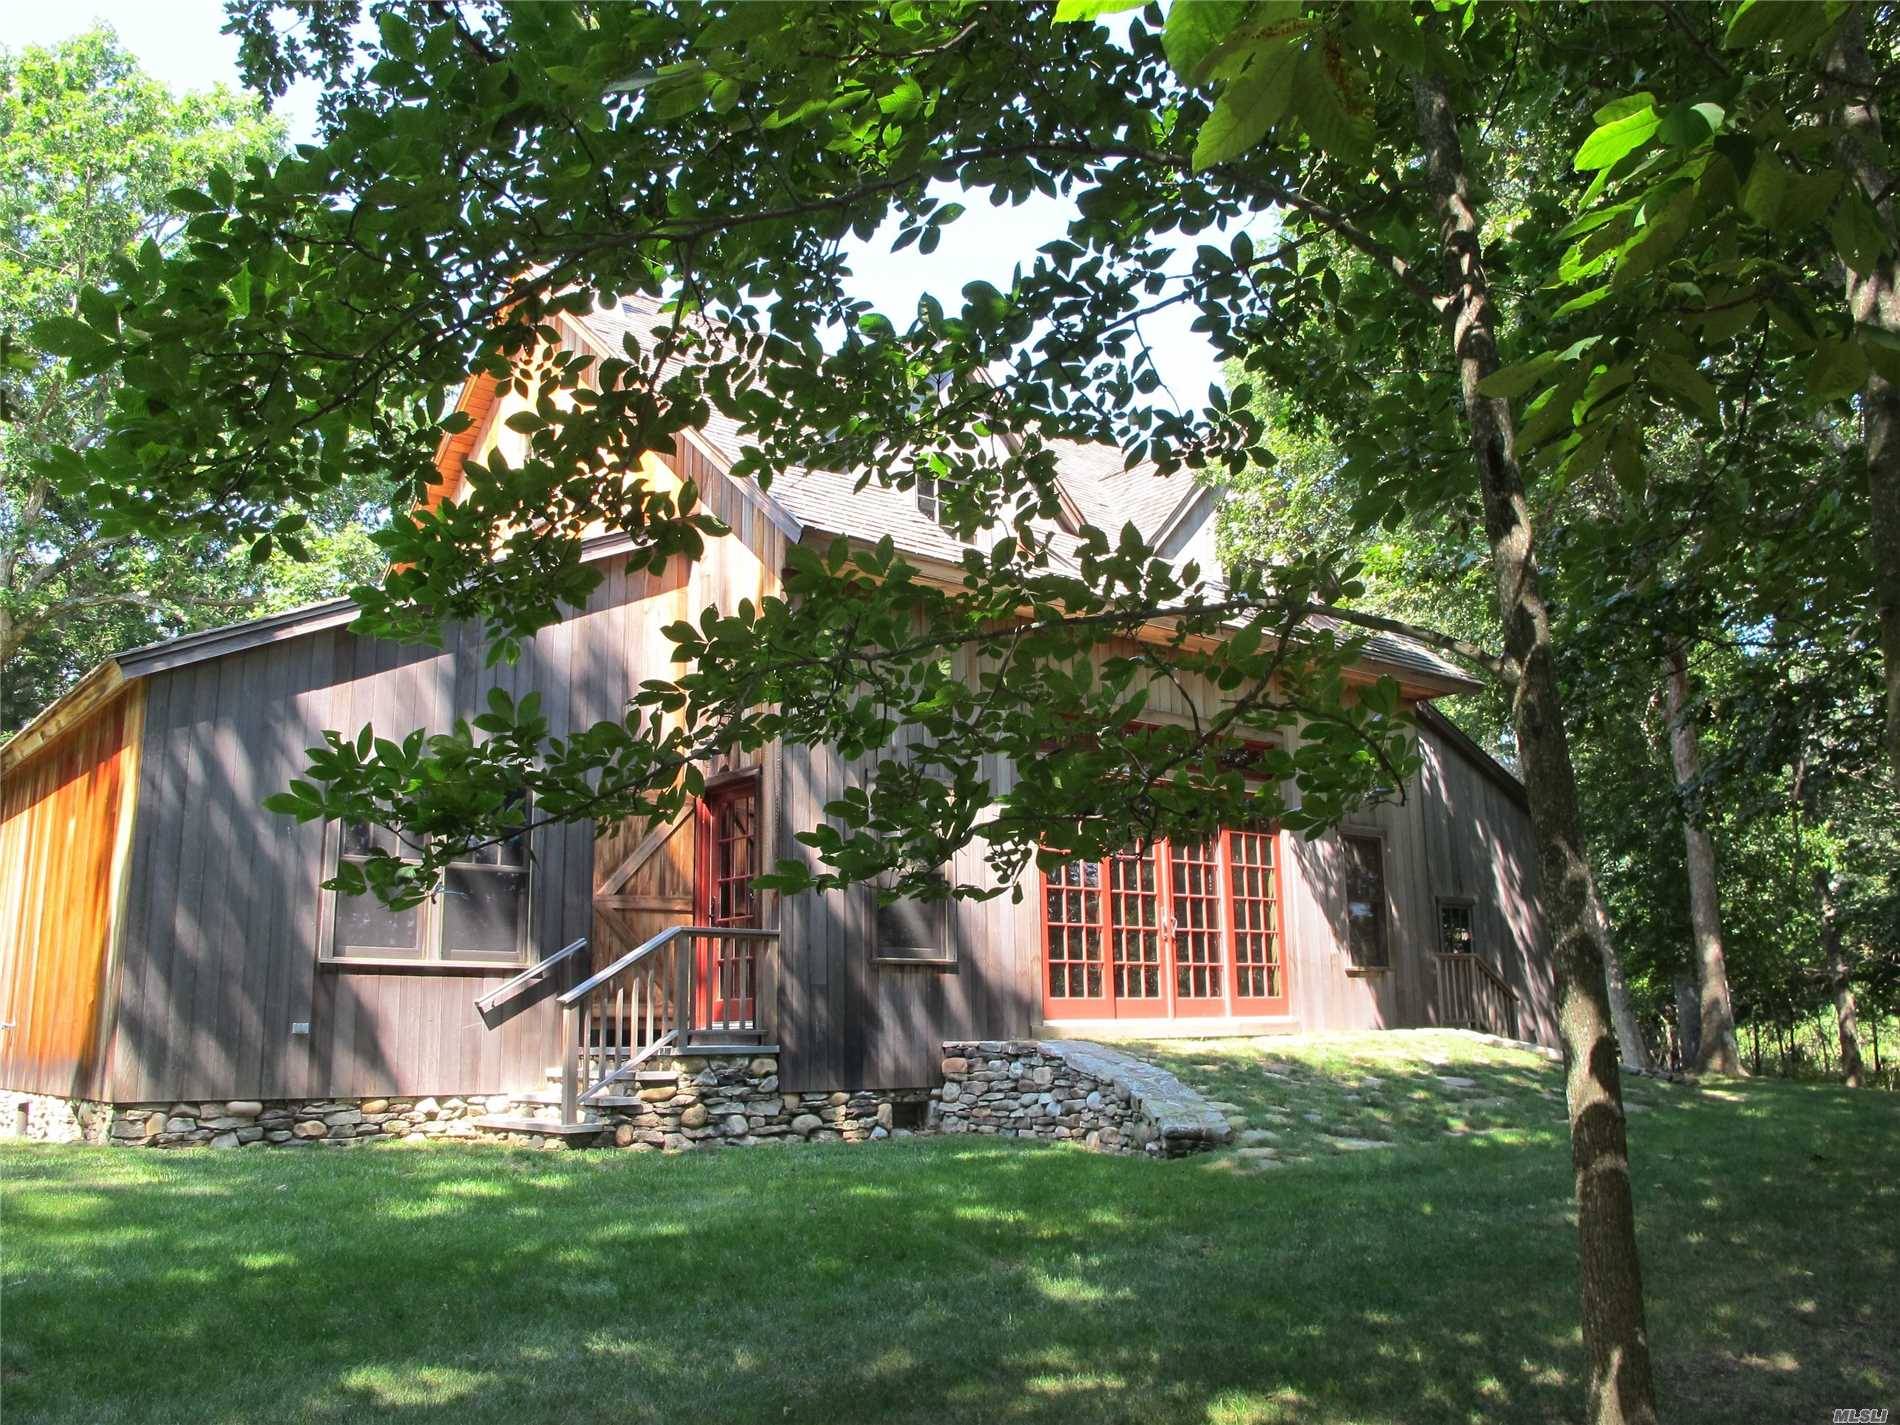 Privacy And Views Abound With This Beautiful Reproduction Of 19th Century Waterfront Barn.